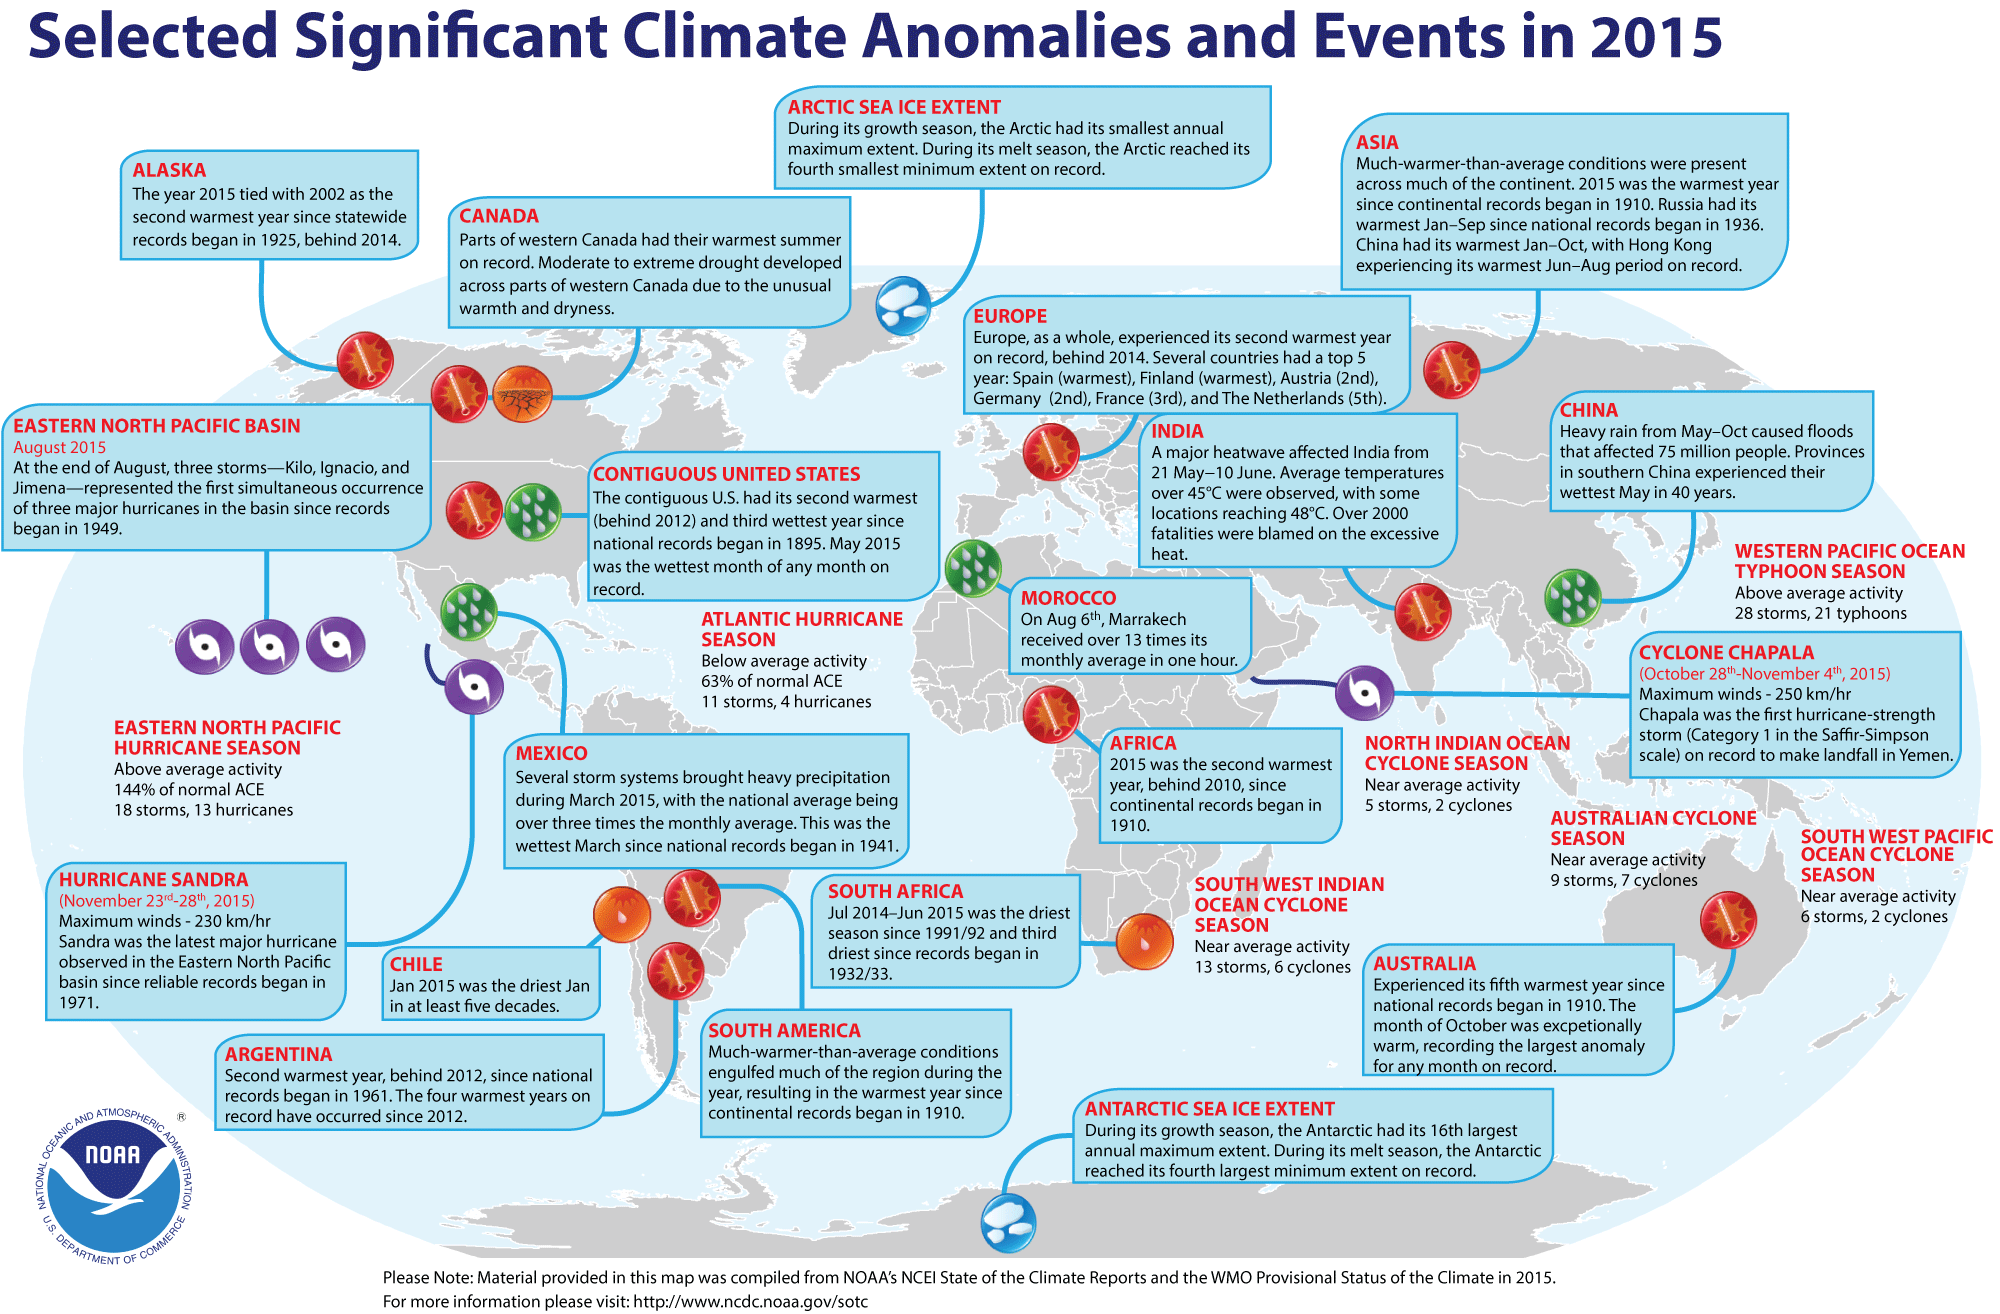 http://www.ncdc.noaa.gov/sotc/service/global/extremes/201513.gif